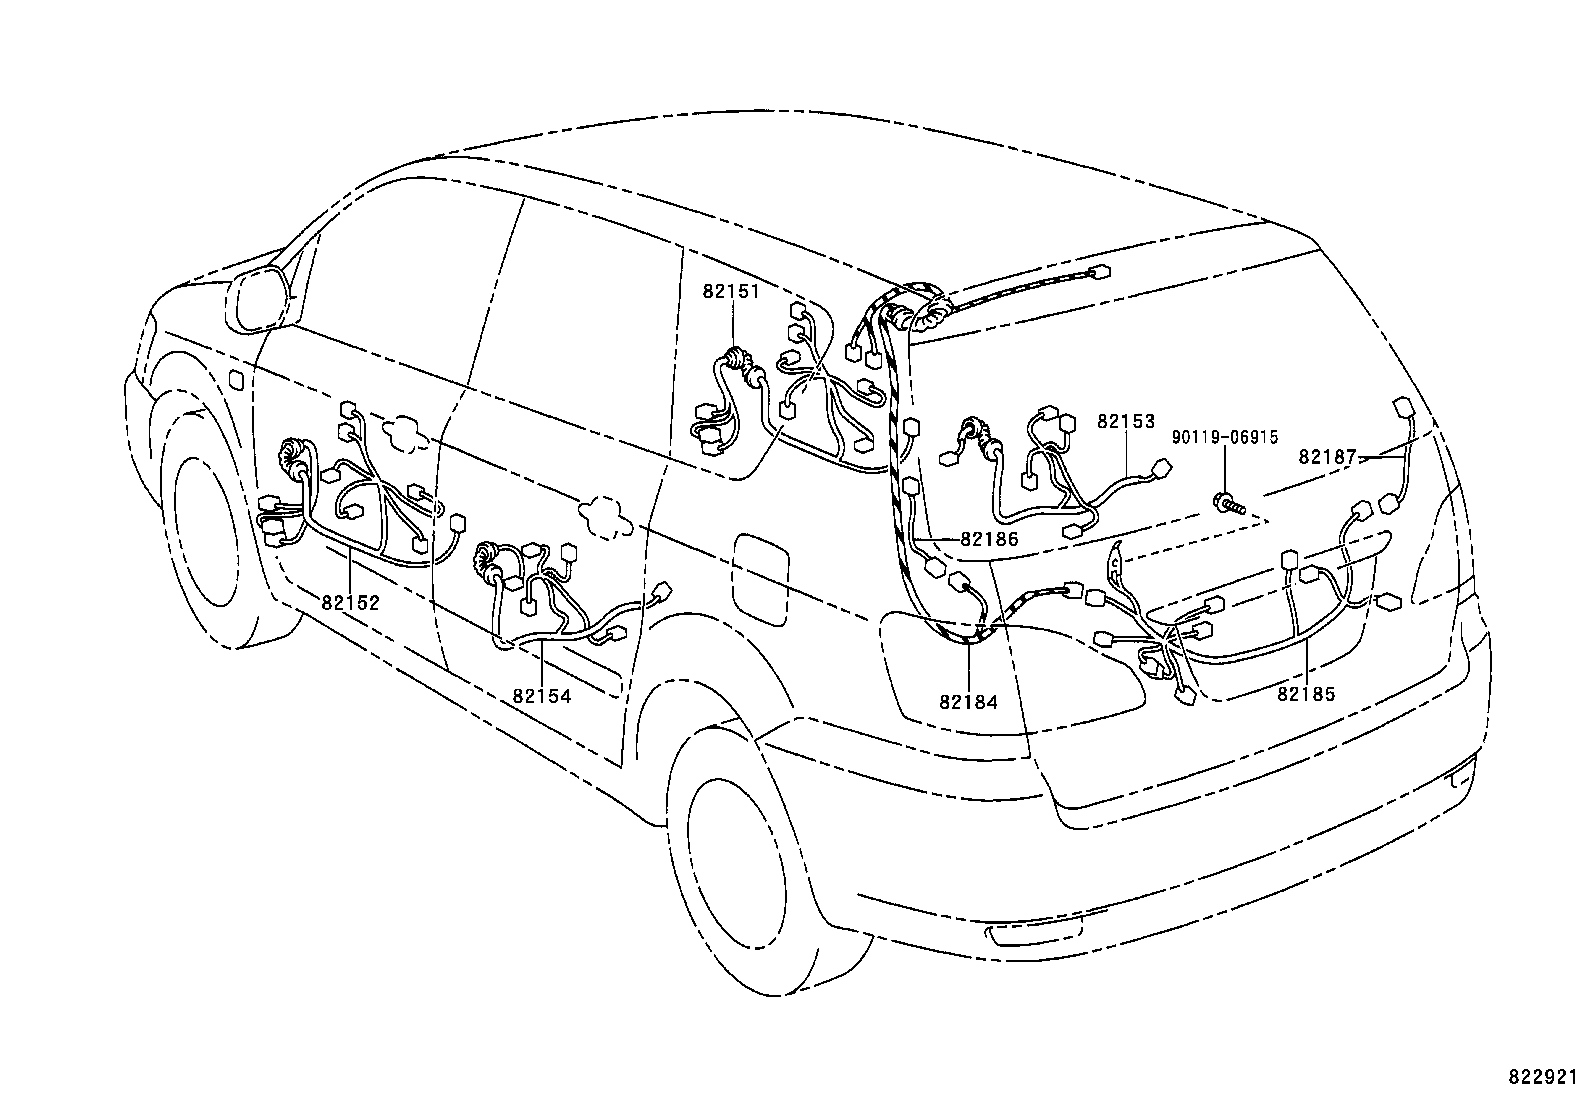  PICNIC AVENSIS VERSO |  WIRING CLAMP